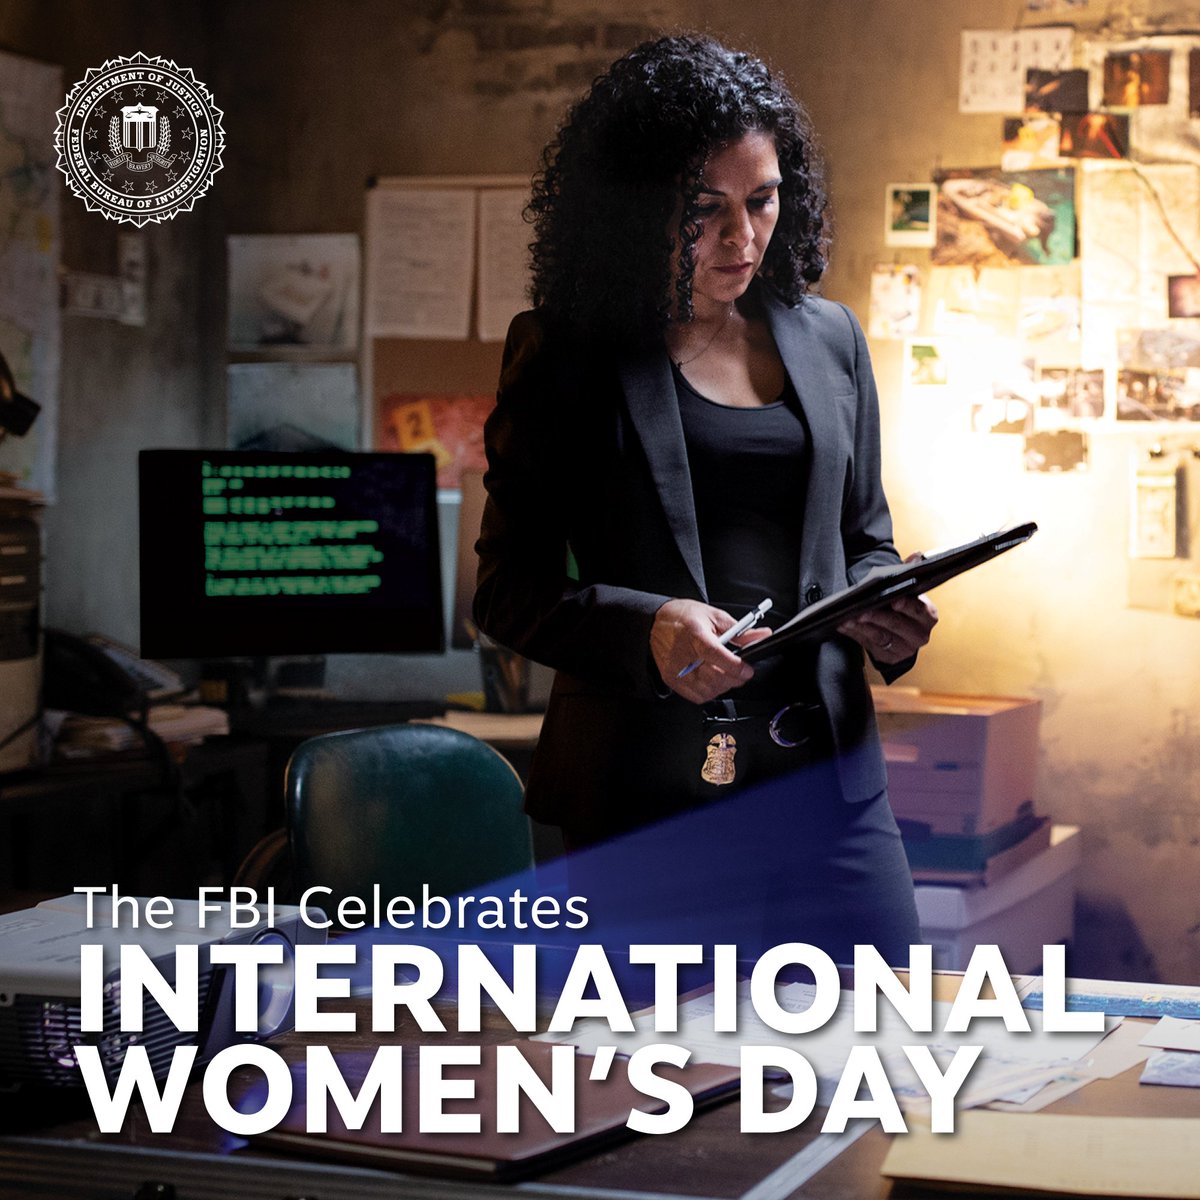 Today, the #FBI celebrates #InternationalWomensDay by recognizing and honoring the expertise and tireless effort women across our agency contribute to the FBI and our country. Thank you for your service, commitment, and the work you do to keep America safe.